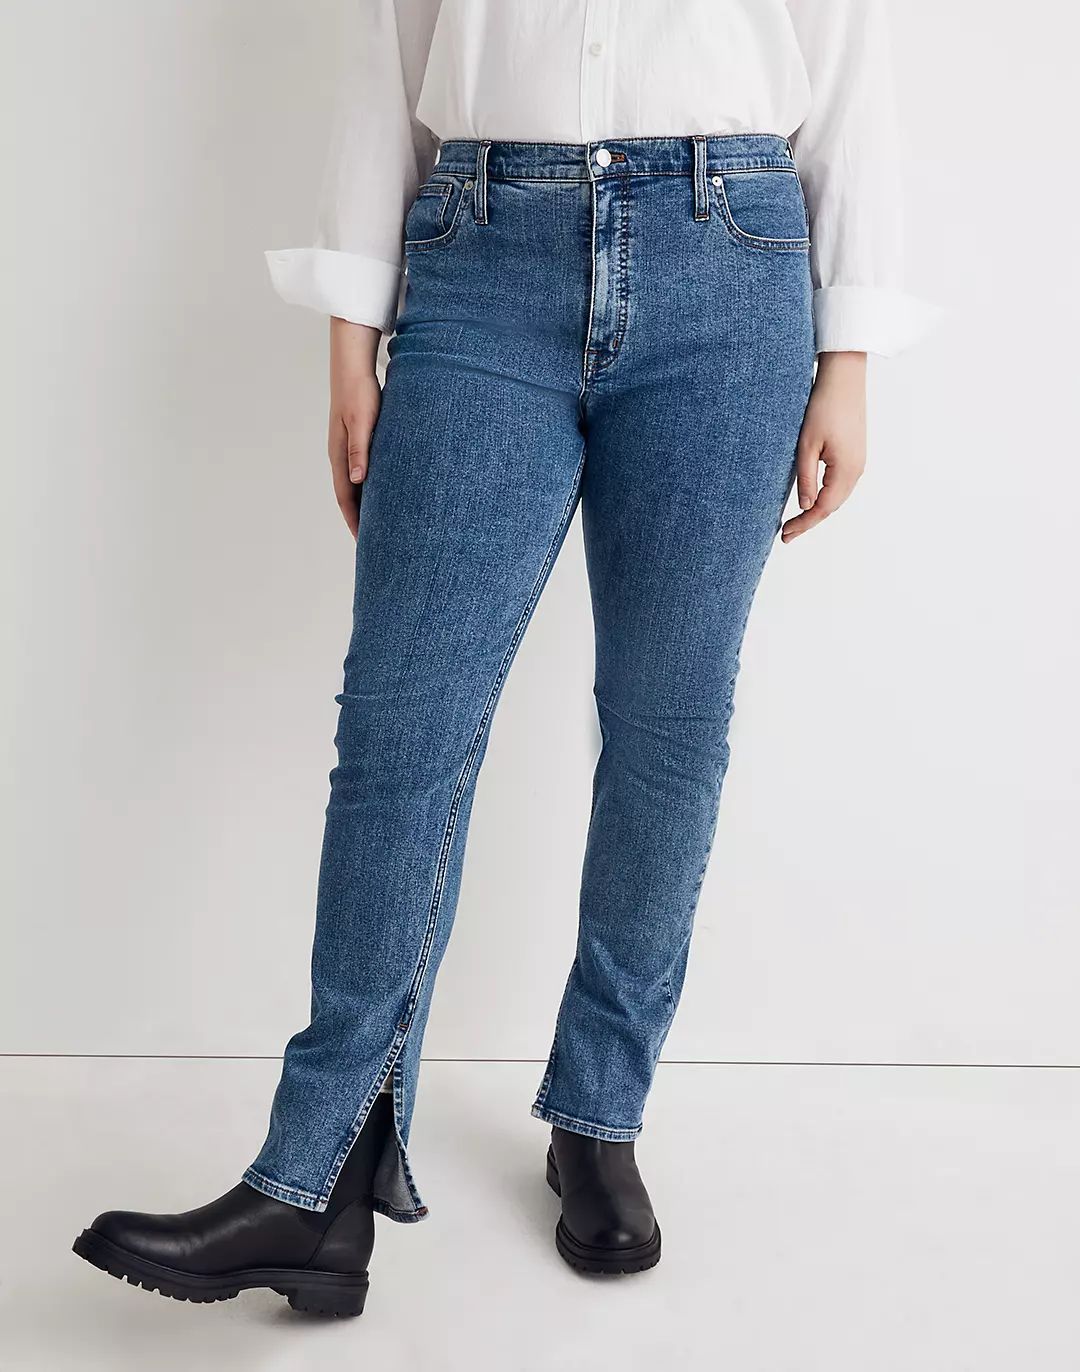 Mid-Rise Stovepipe Jeans in Knowland Wash: Slit-Hem Edition | Madewell